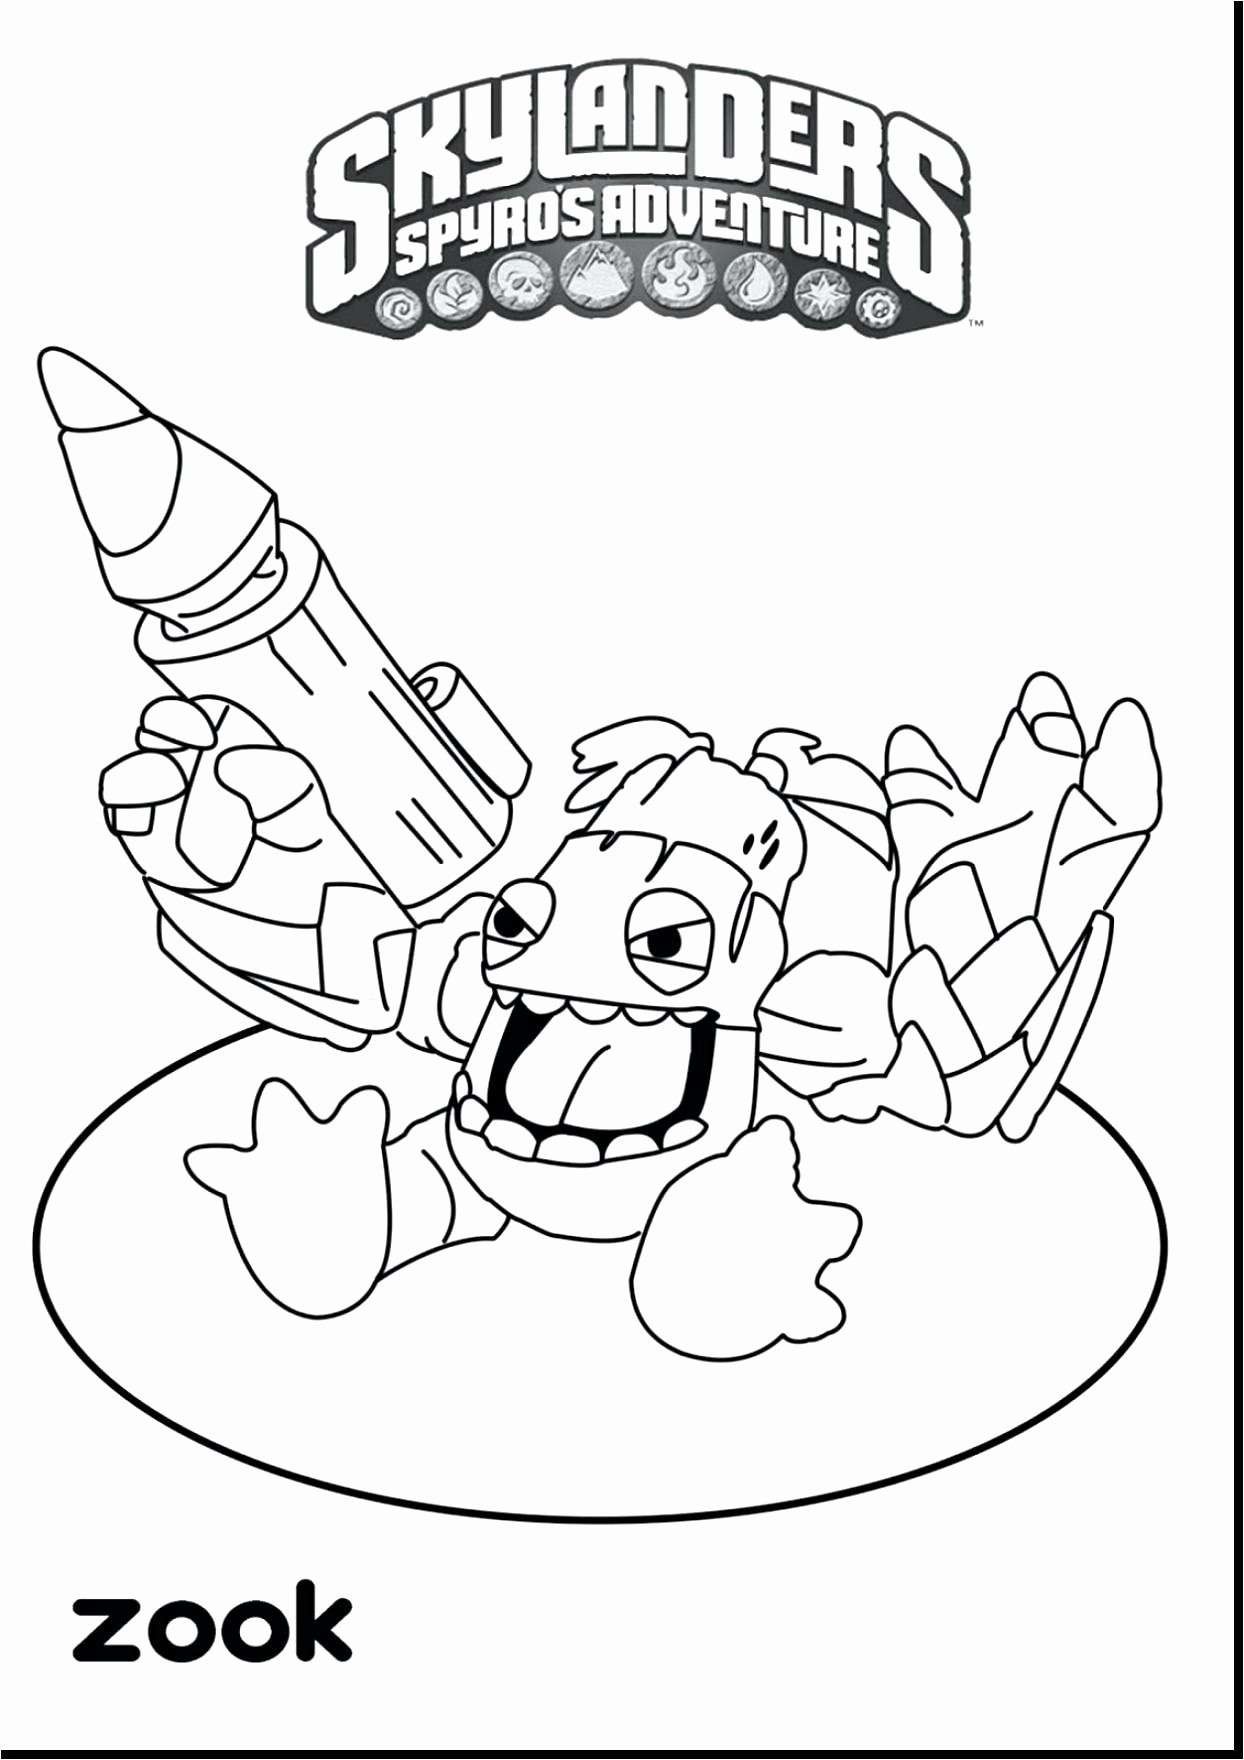 Cool Coloring Page Inspirational Witch Coloring Pages New Crayola Pages 0d Coloring Page Printable